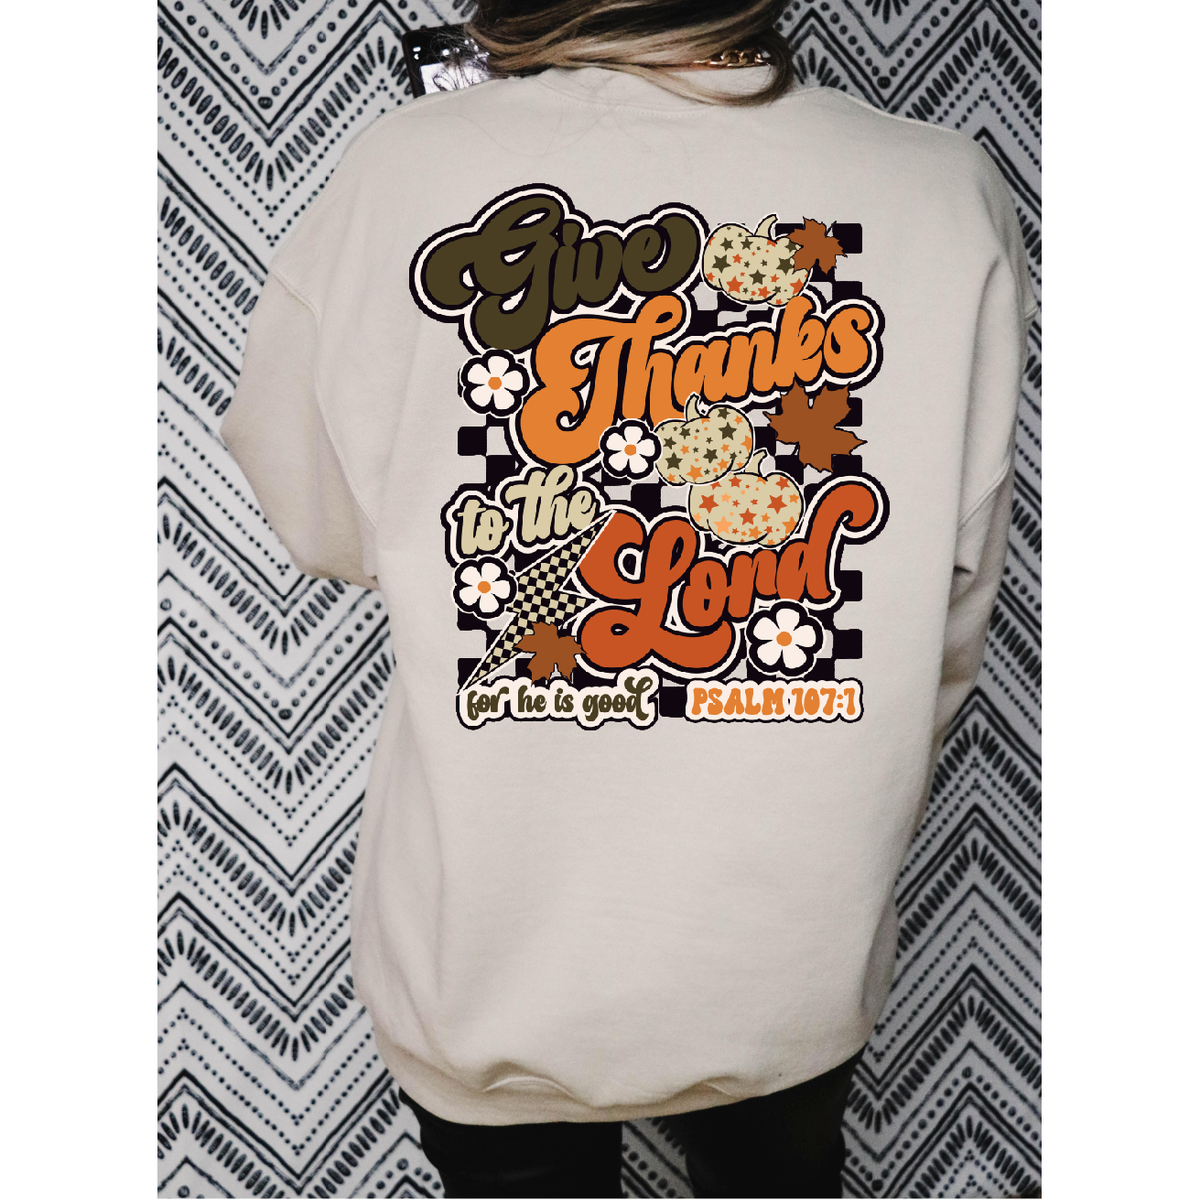 Give Thanks to the Lord Crewneck Sweatshirt or Tee